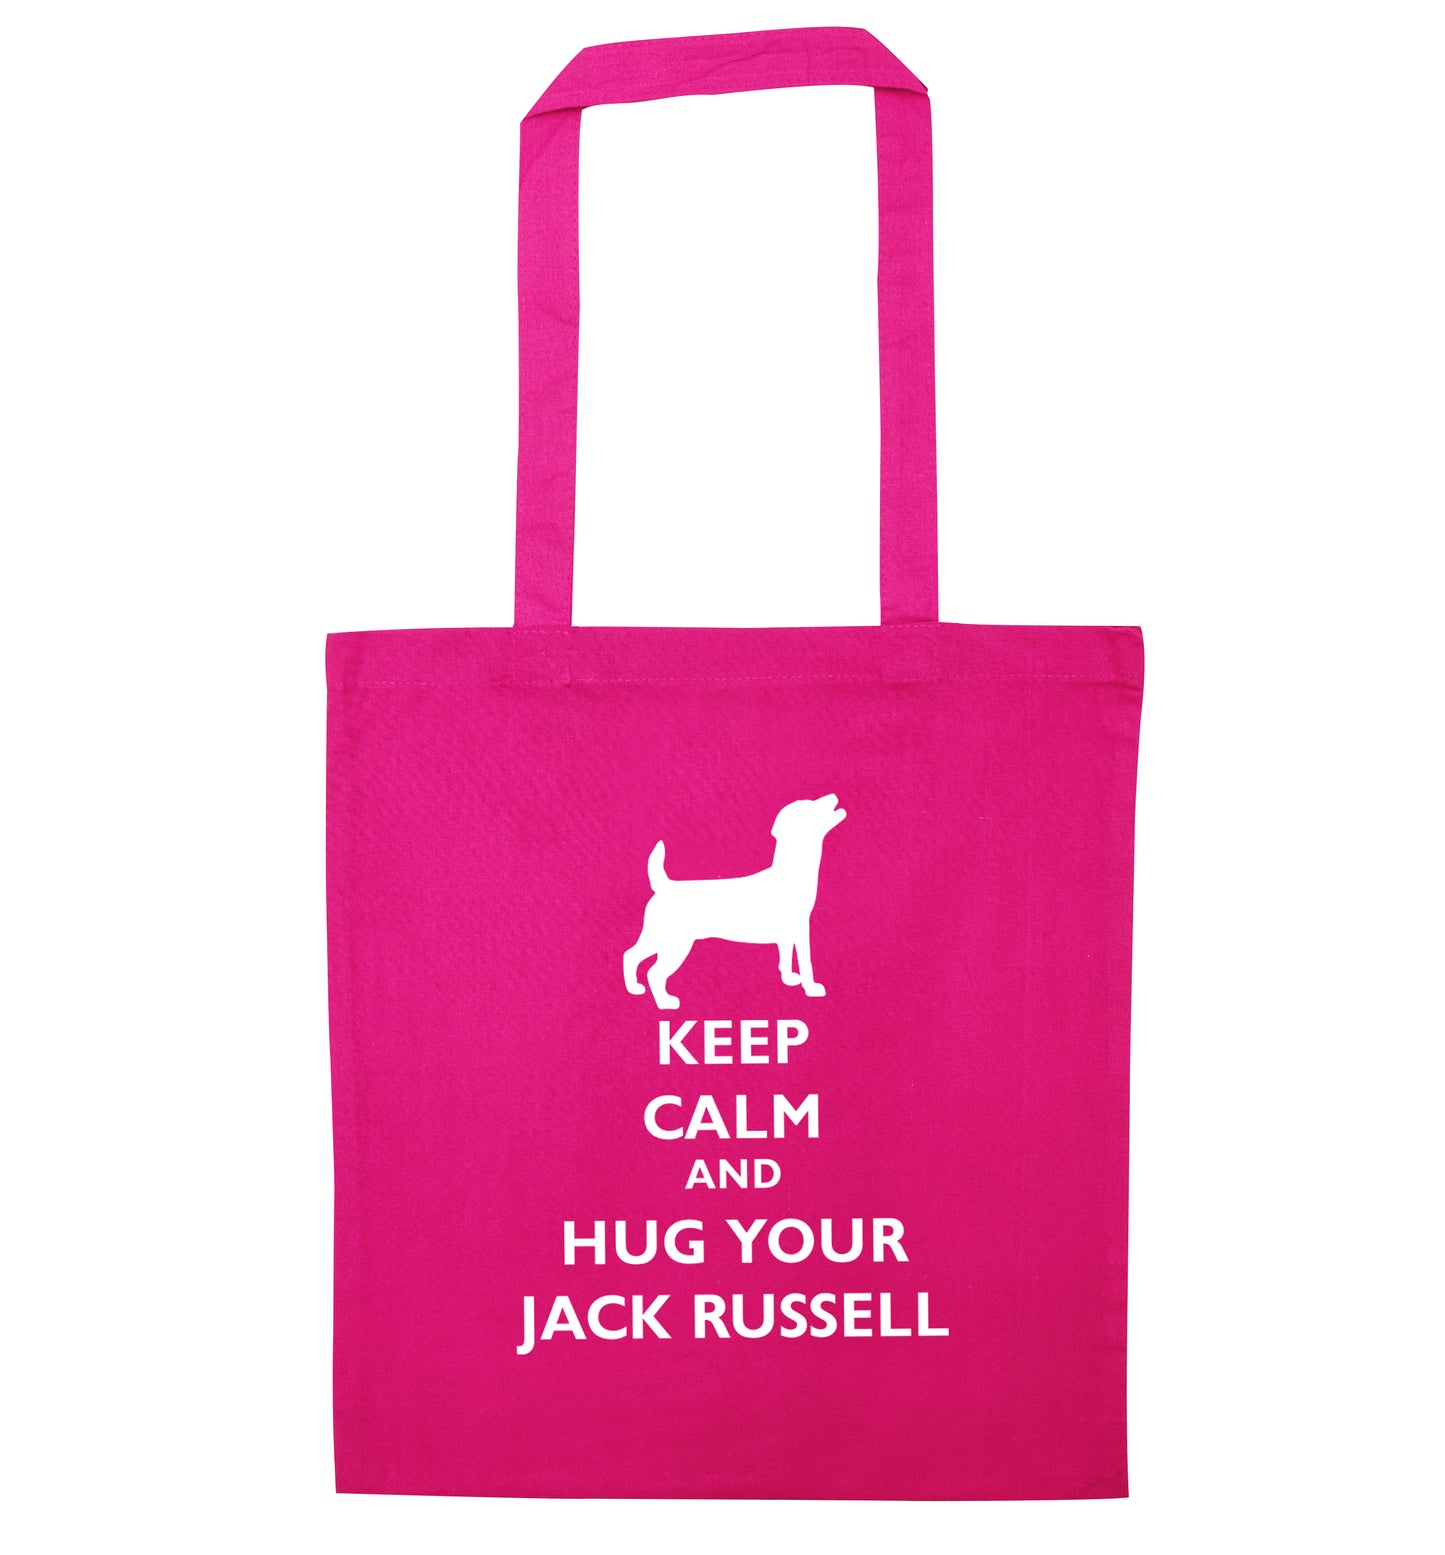 Keep calm and hug your jack russell pink tote bag